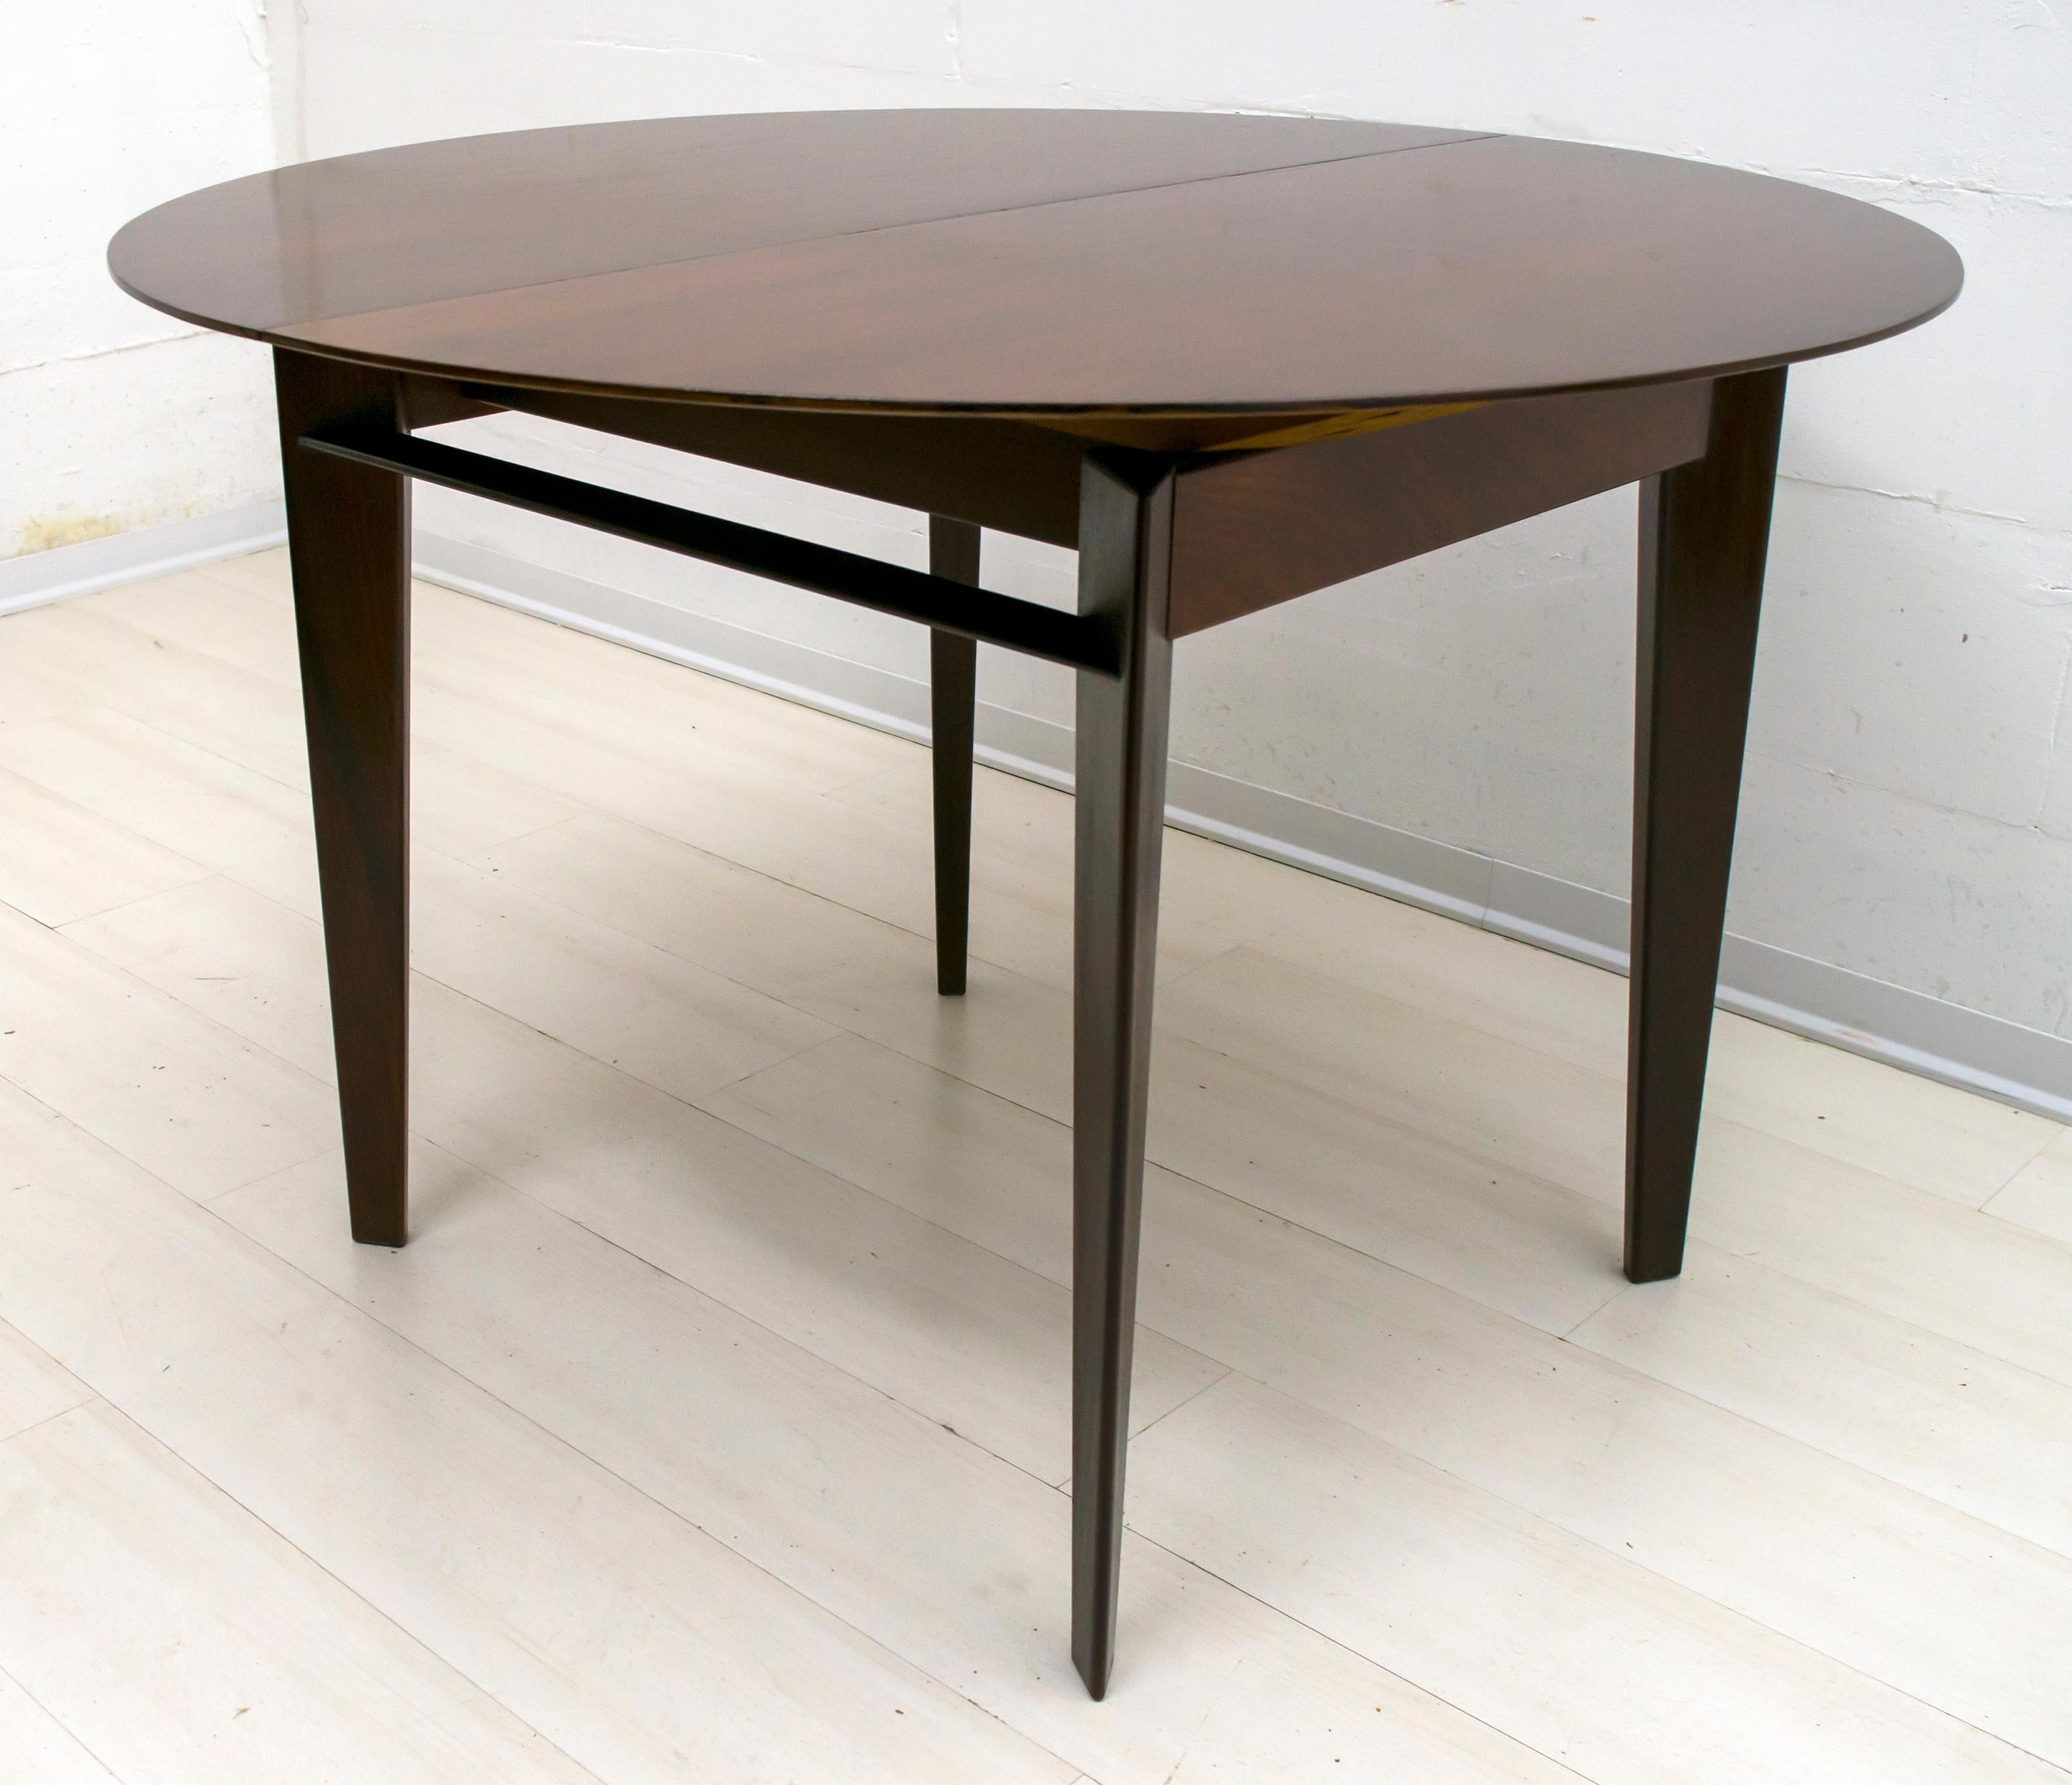 This table was designed by the famous Italian designer Edmondo Palutari for Vittorio Dassi, using teak wood, in Italy in the 1950s.
The table can be opened and has two extensions that fold and store on the table itself.
Open the table with the two